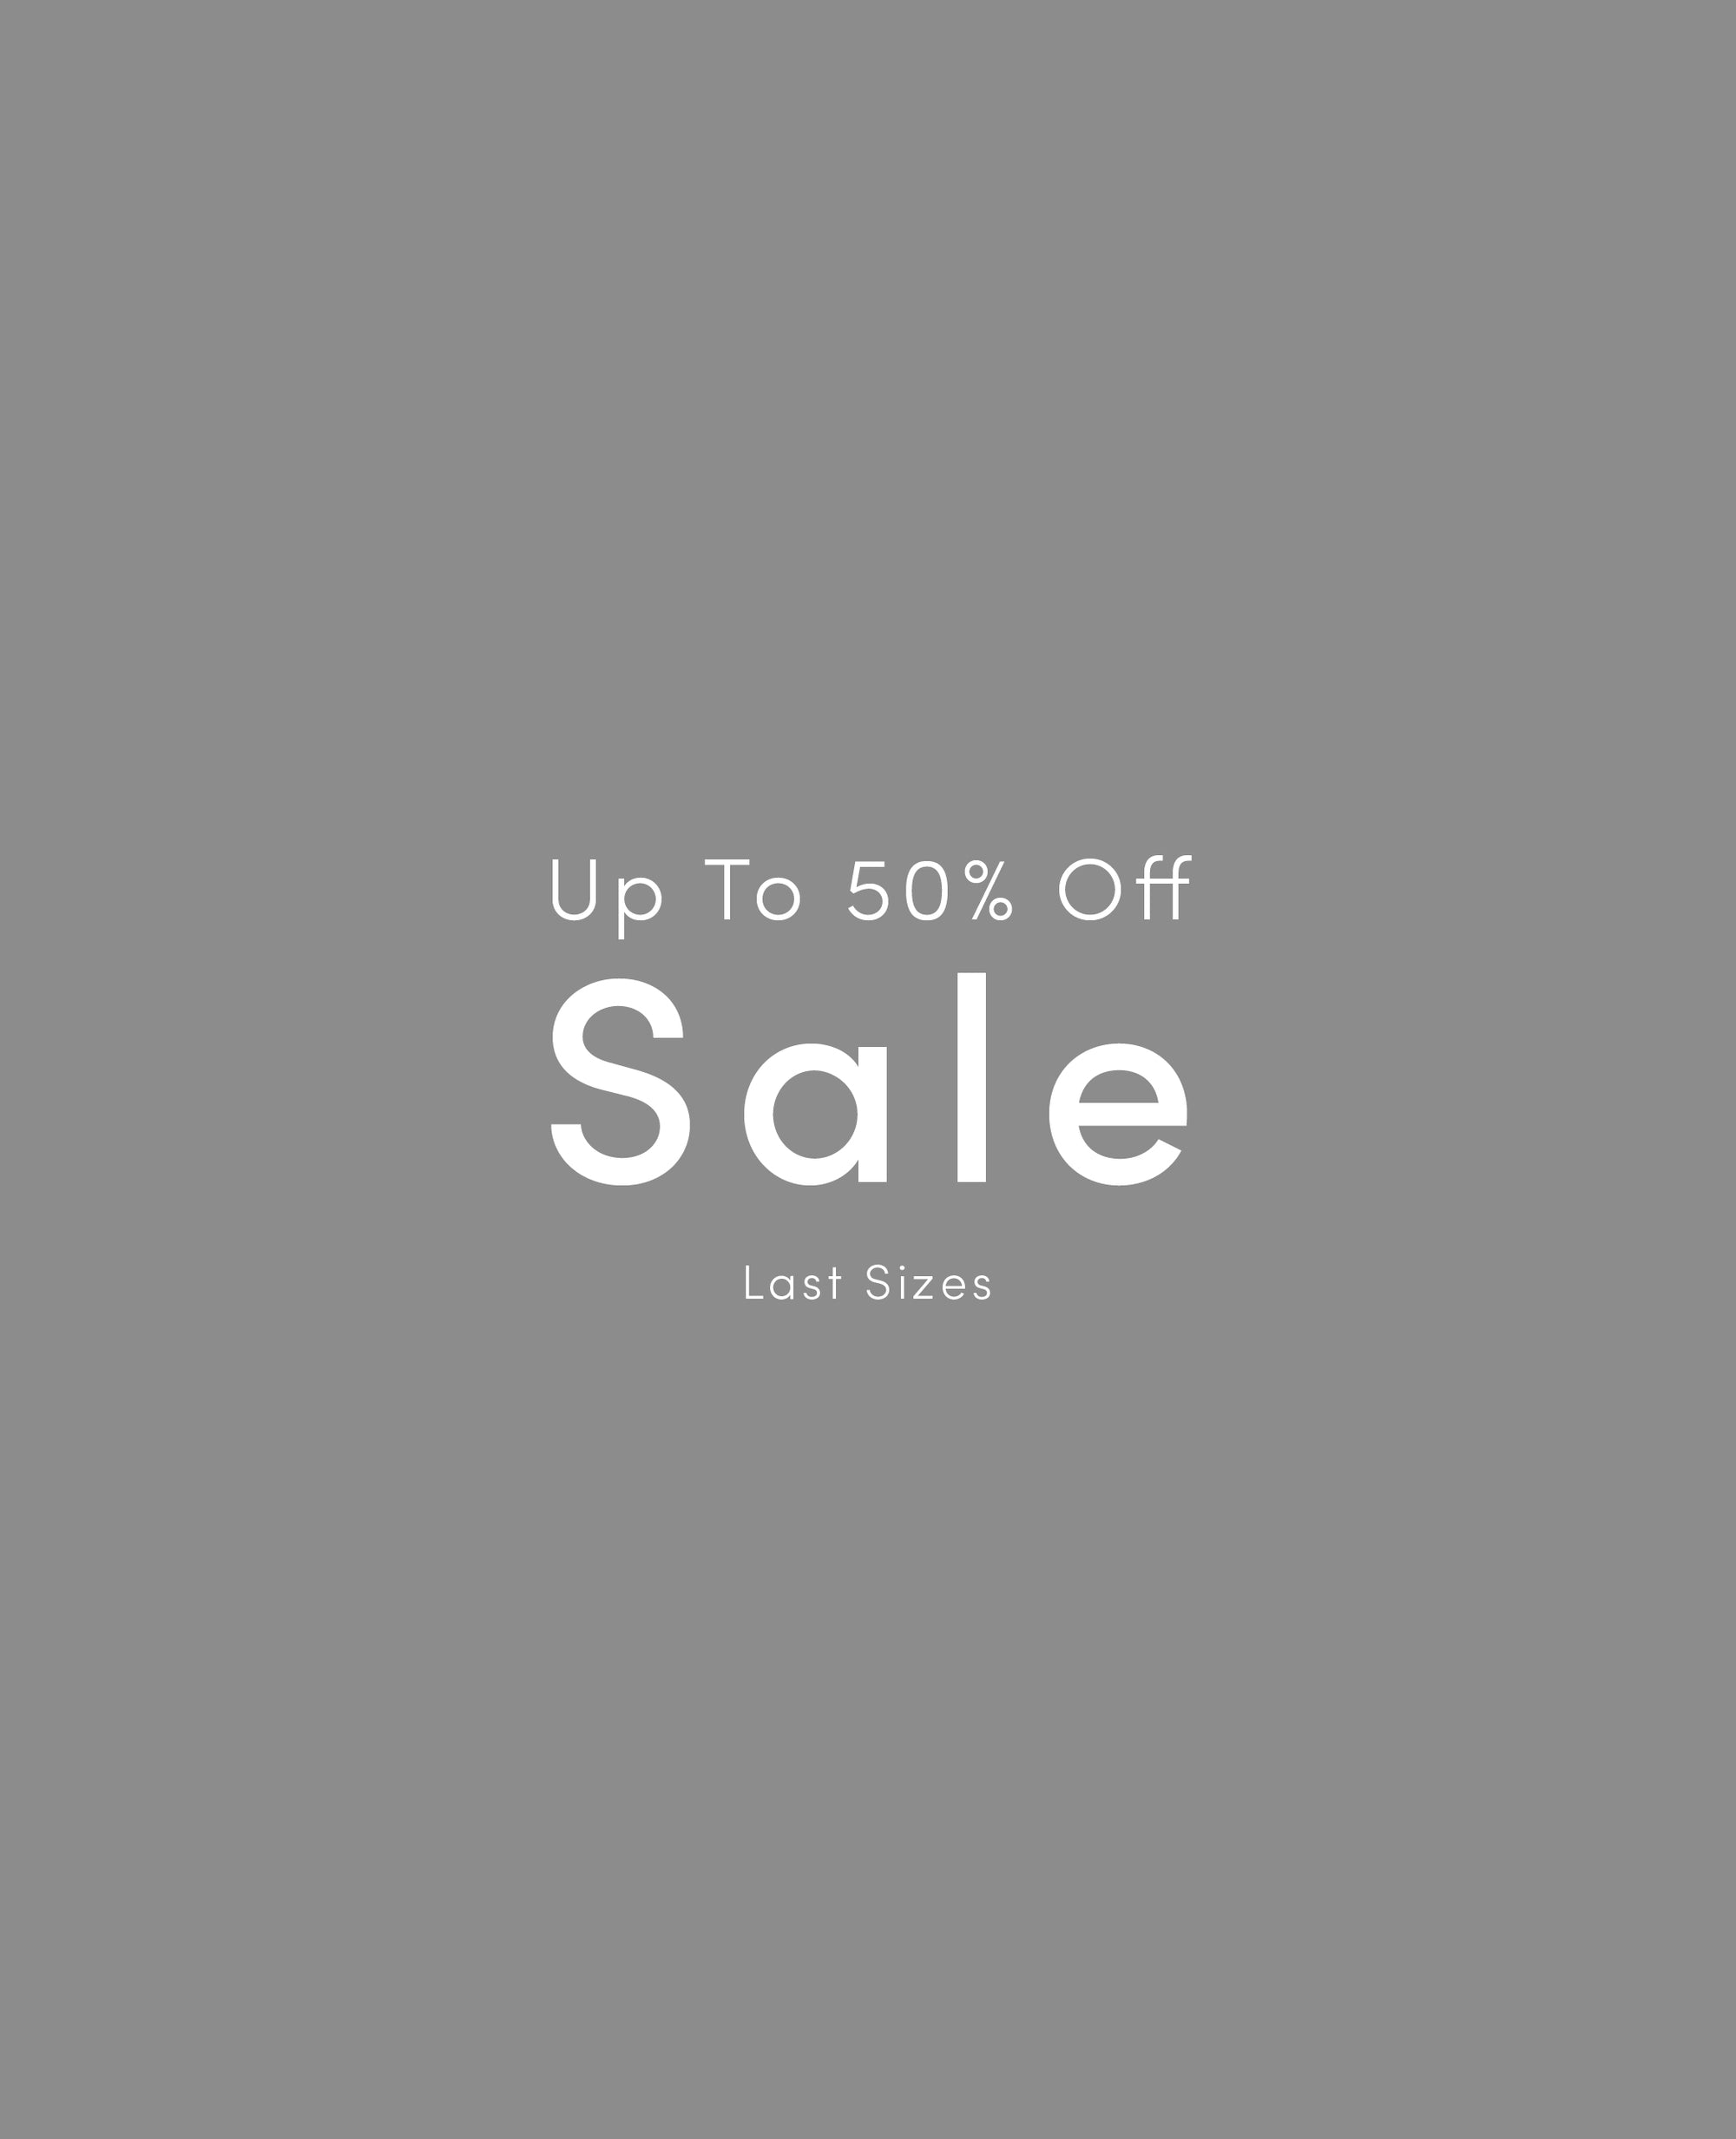 Up To 50% Off Sale